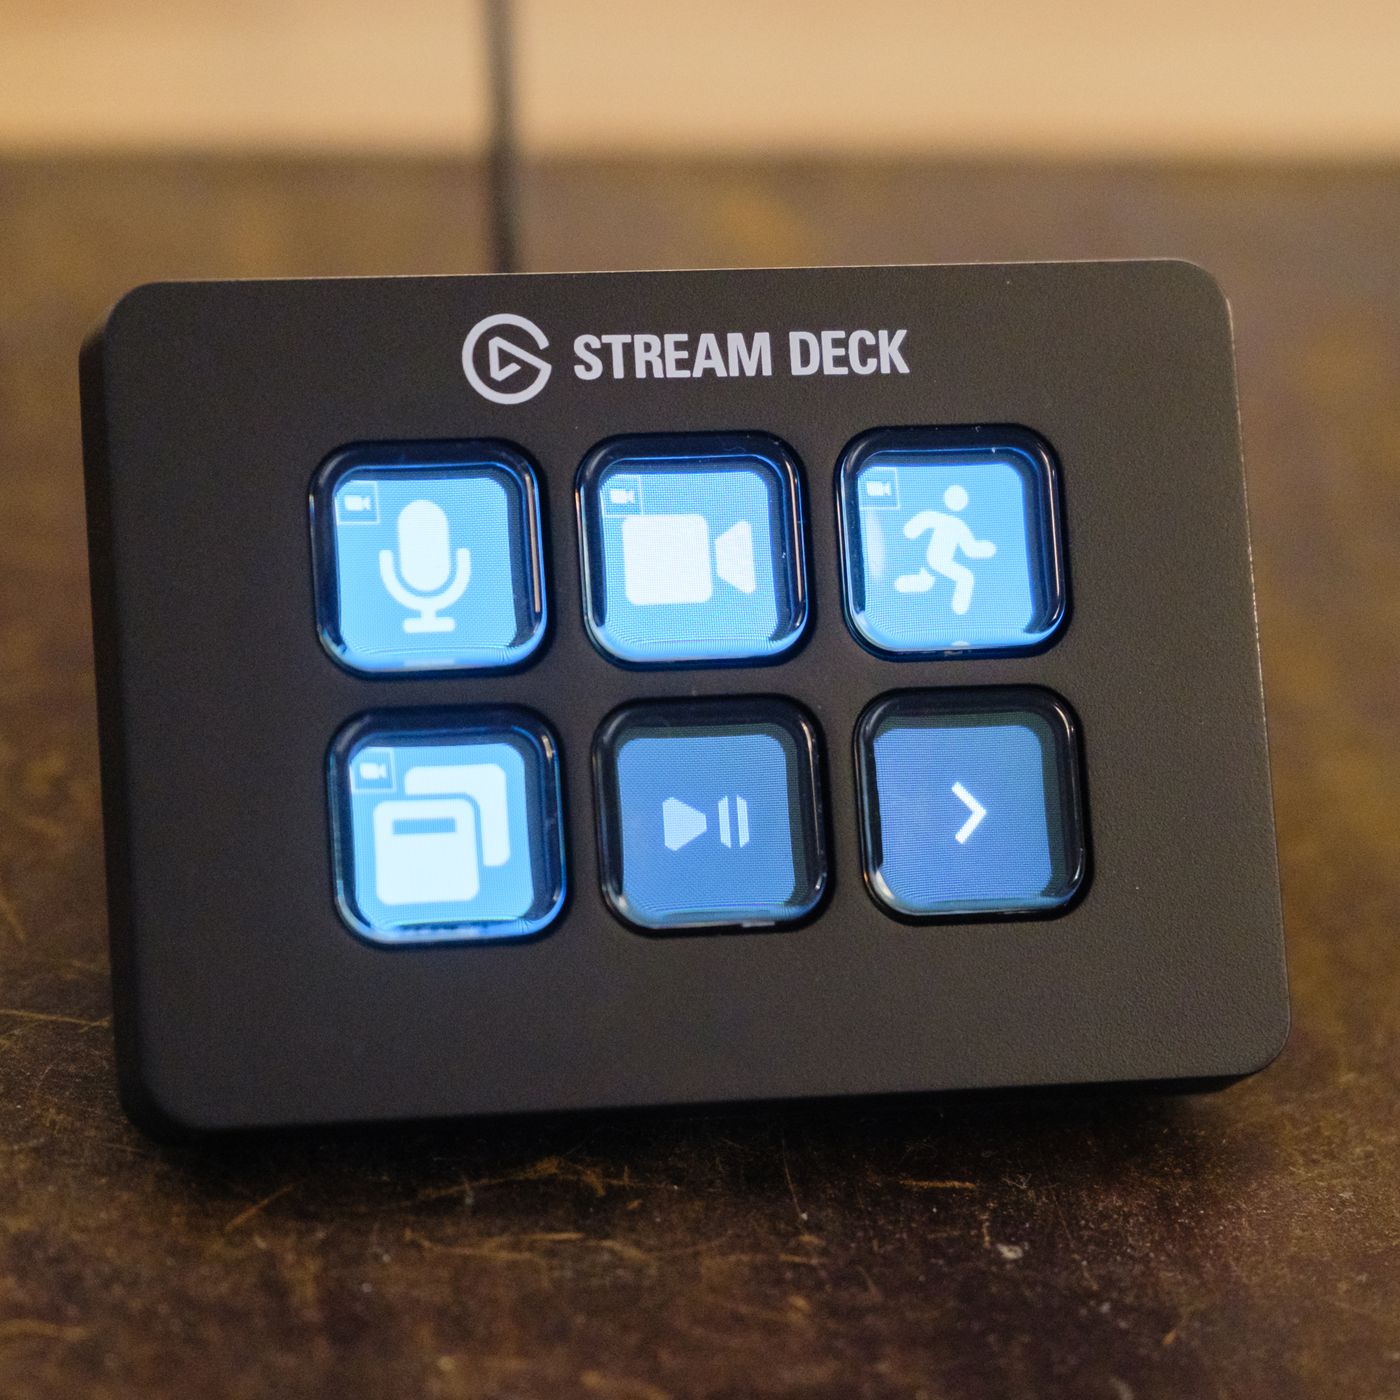 A Stream Deck Mini is the perfect little Zoom controller - The Verge